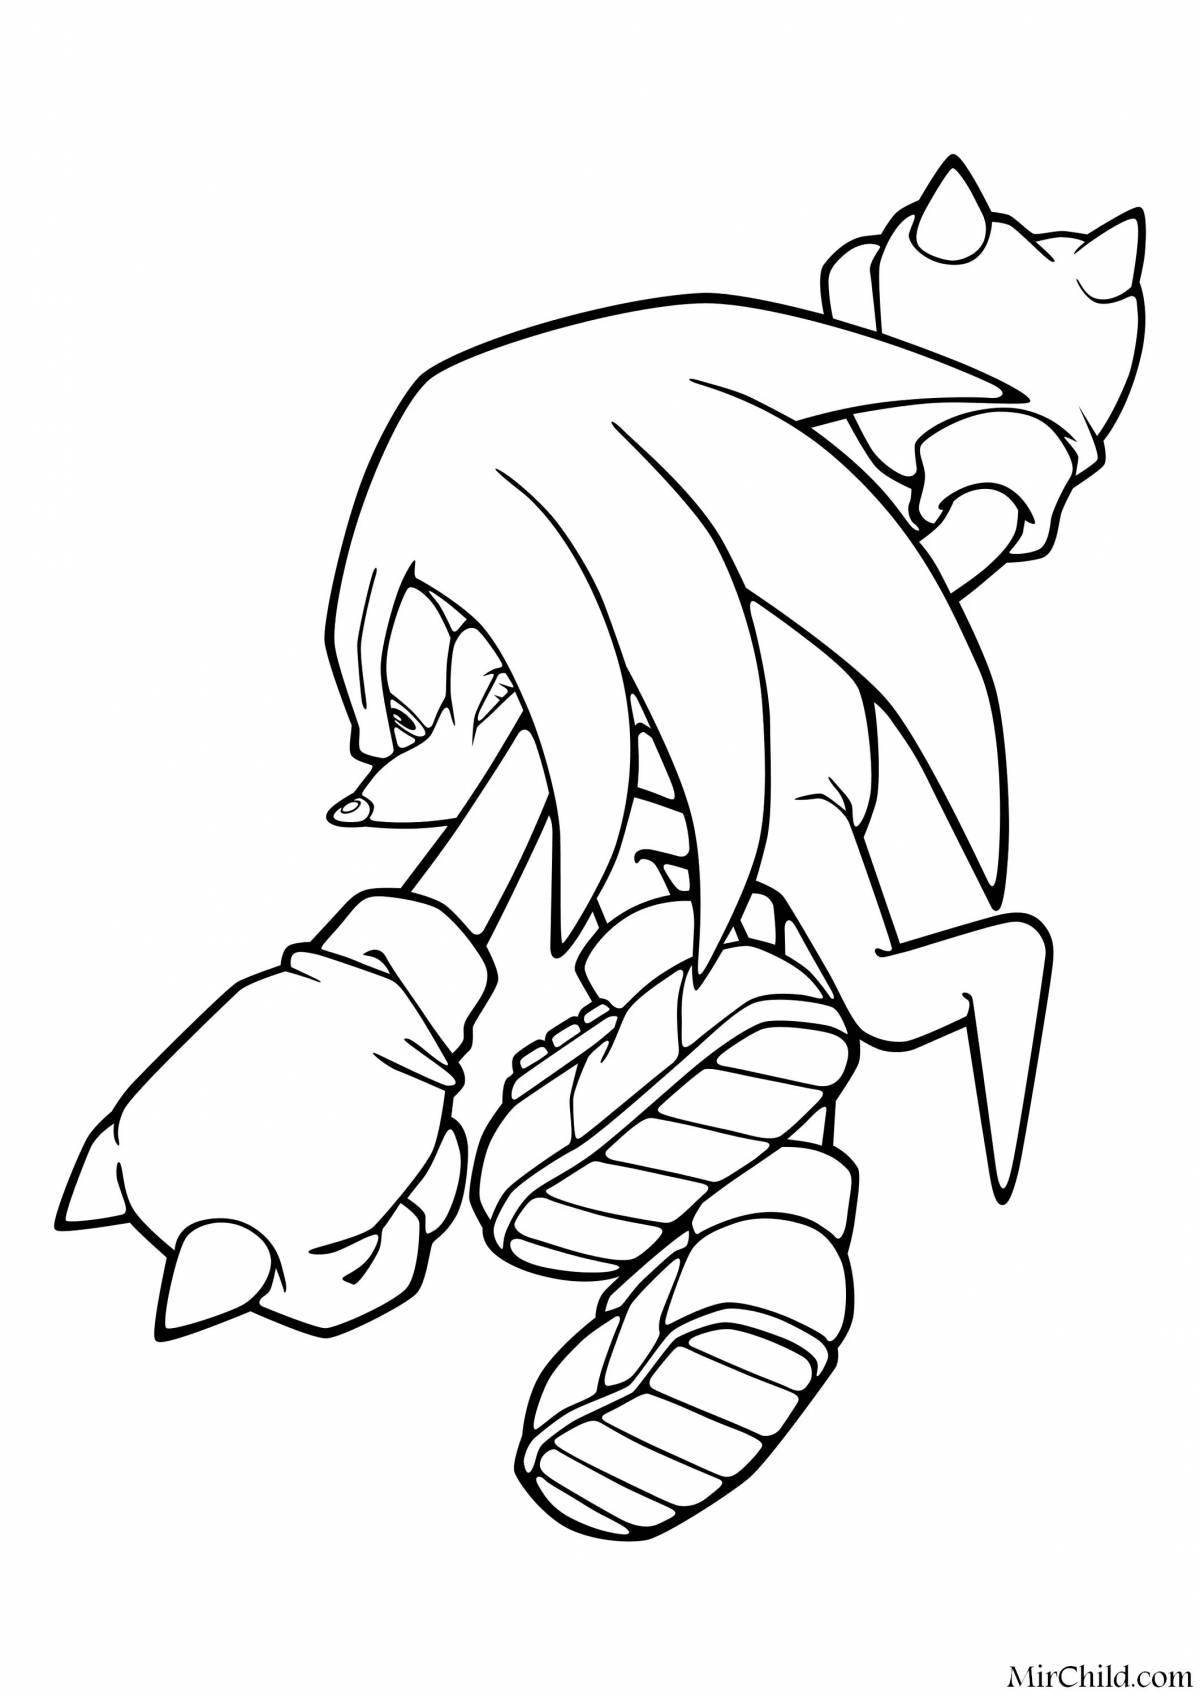 Knuckles fun coloring